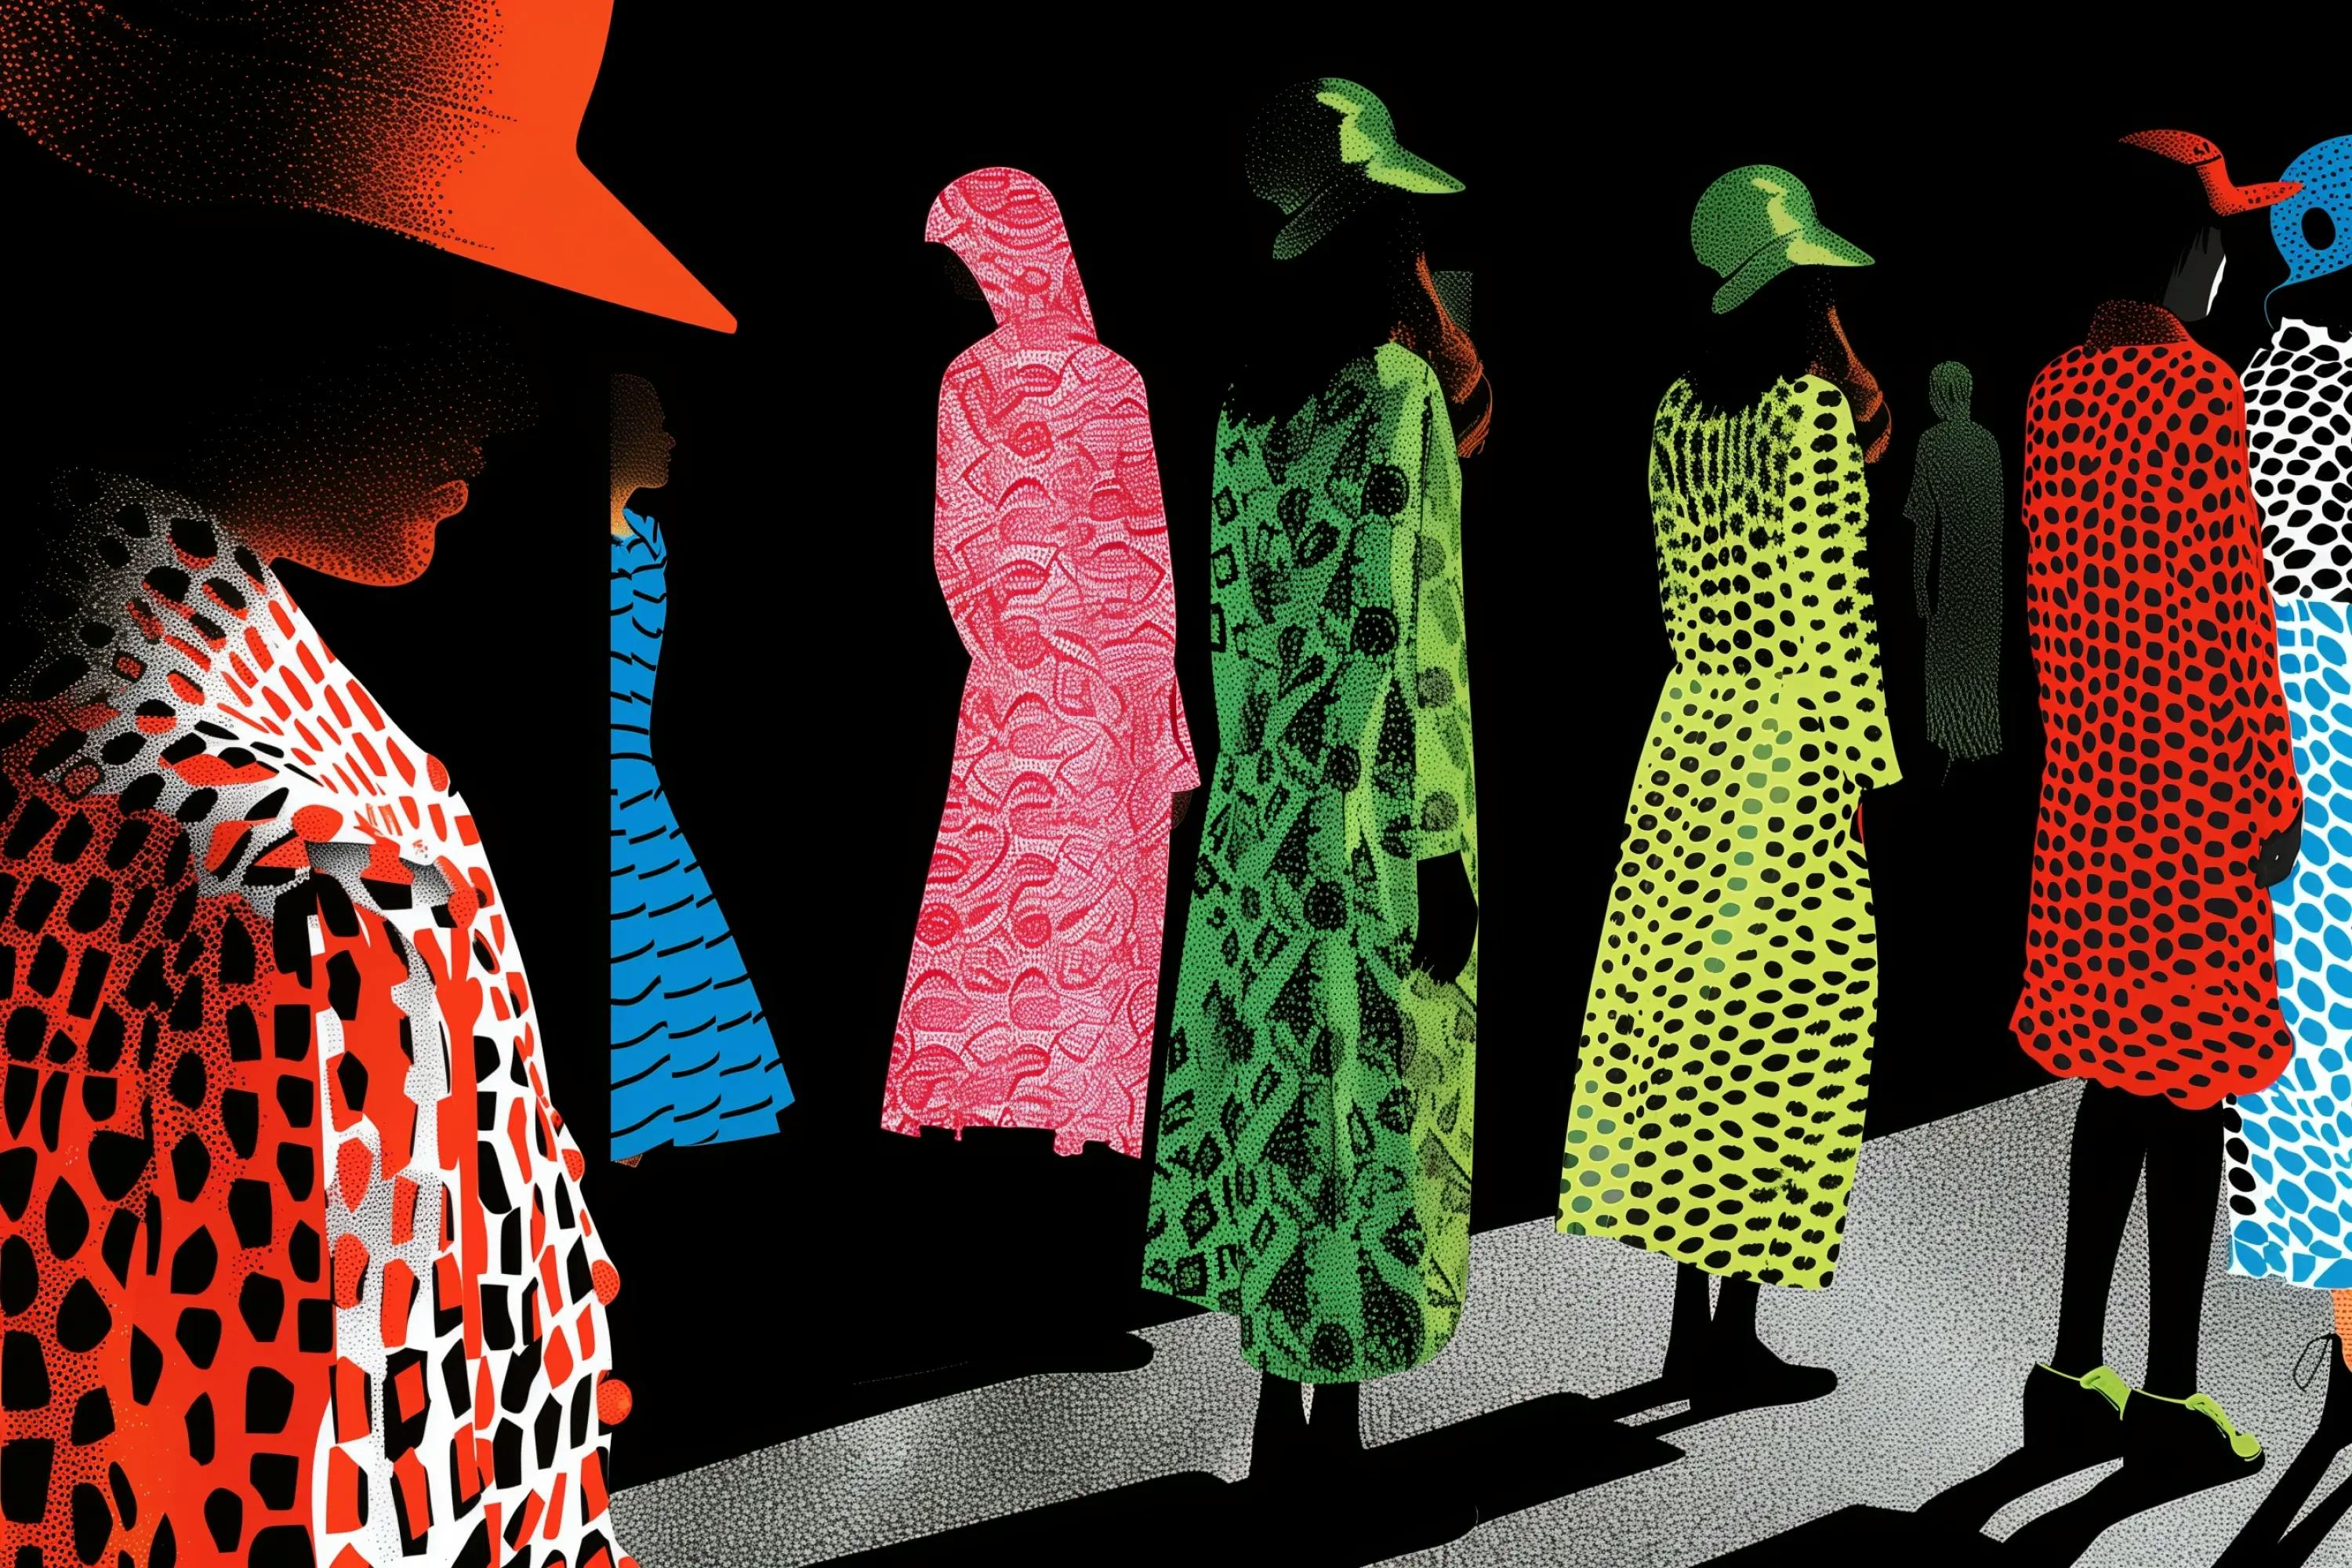 Silhouetted Illustrations of Women in High Fashion Clothing